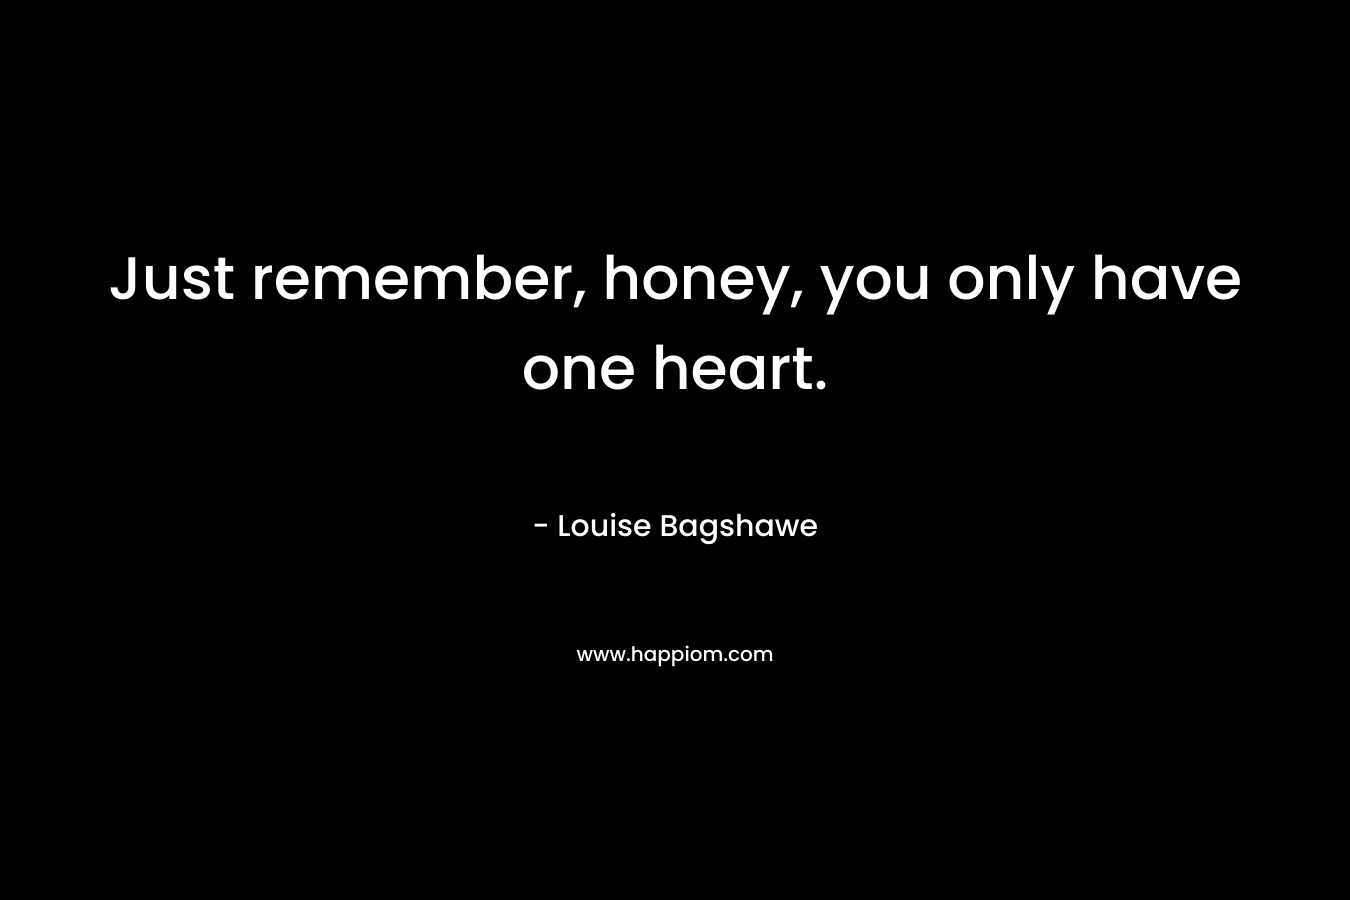 Just remember, honey, you only have one heart.